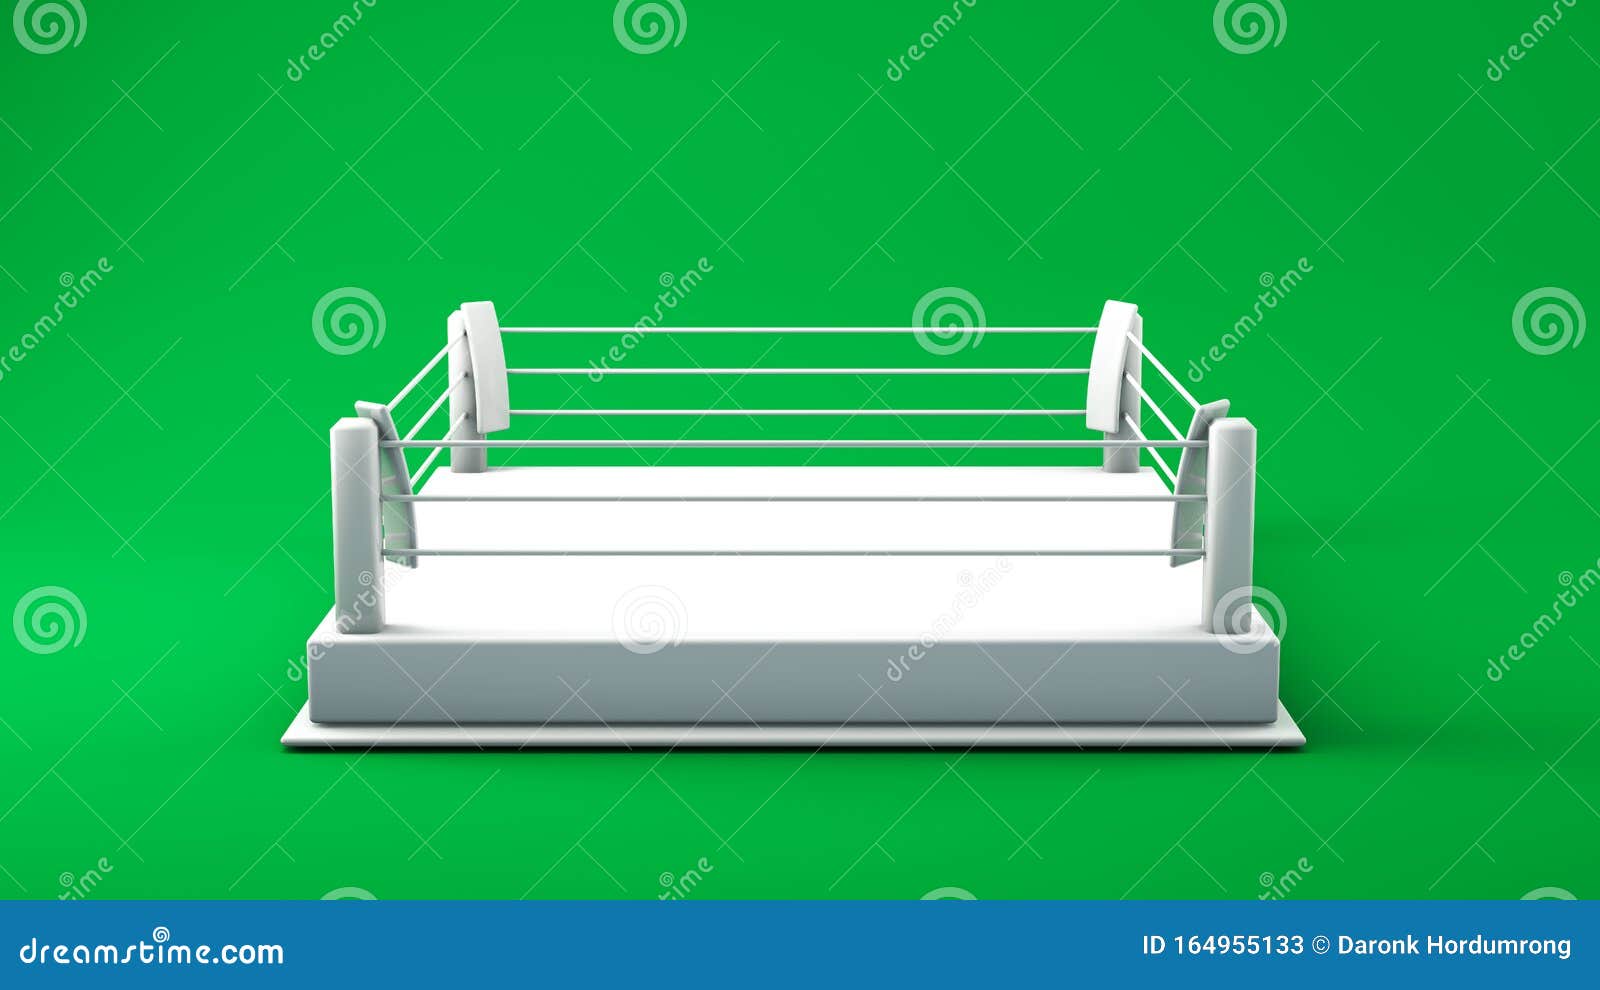 Download The Realistic Mock-up Boxing Ring Arena Stock Illustration ...